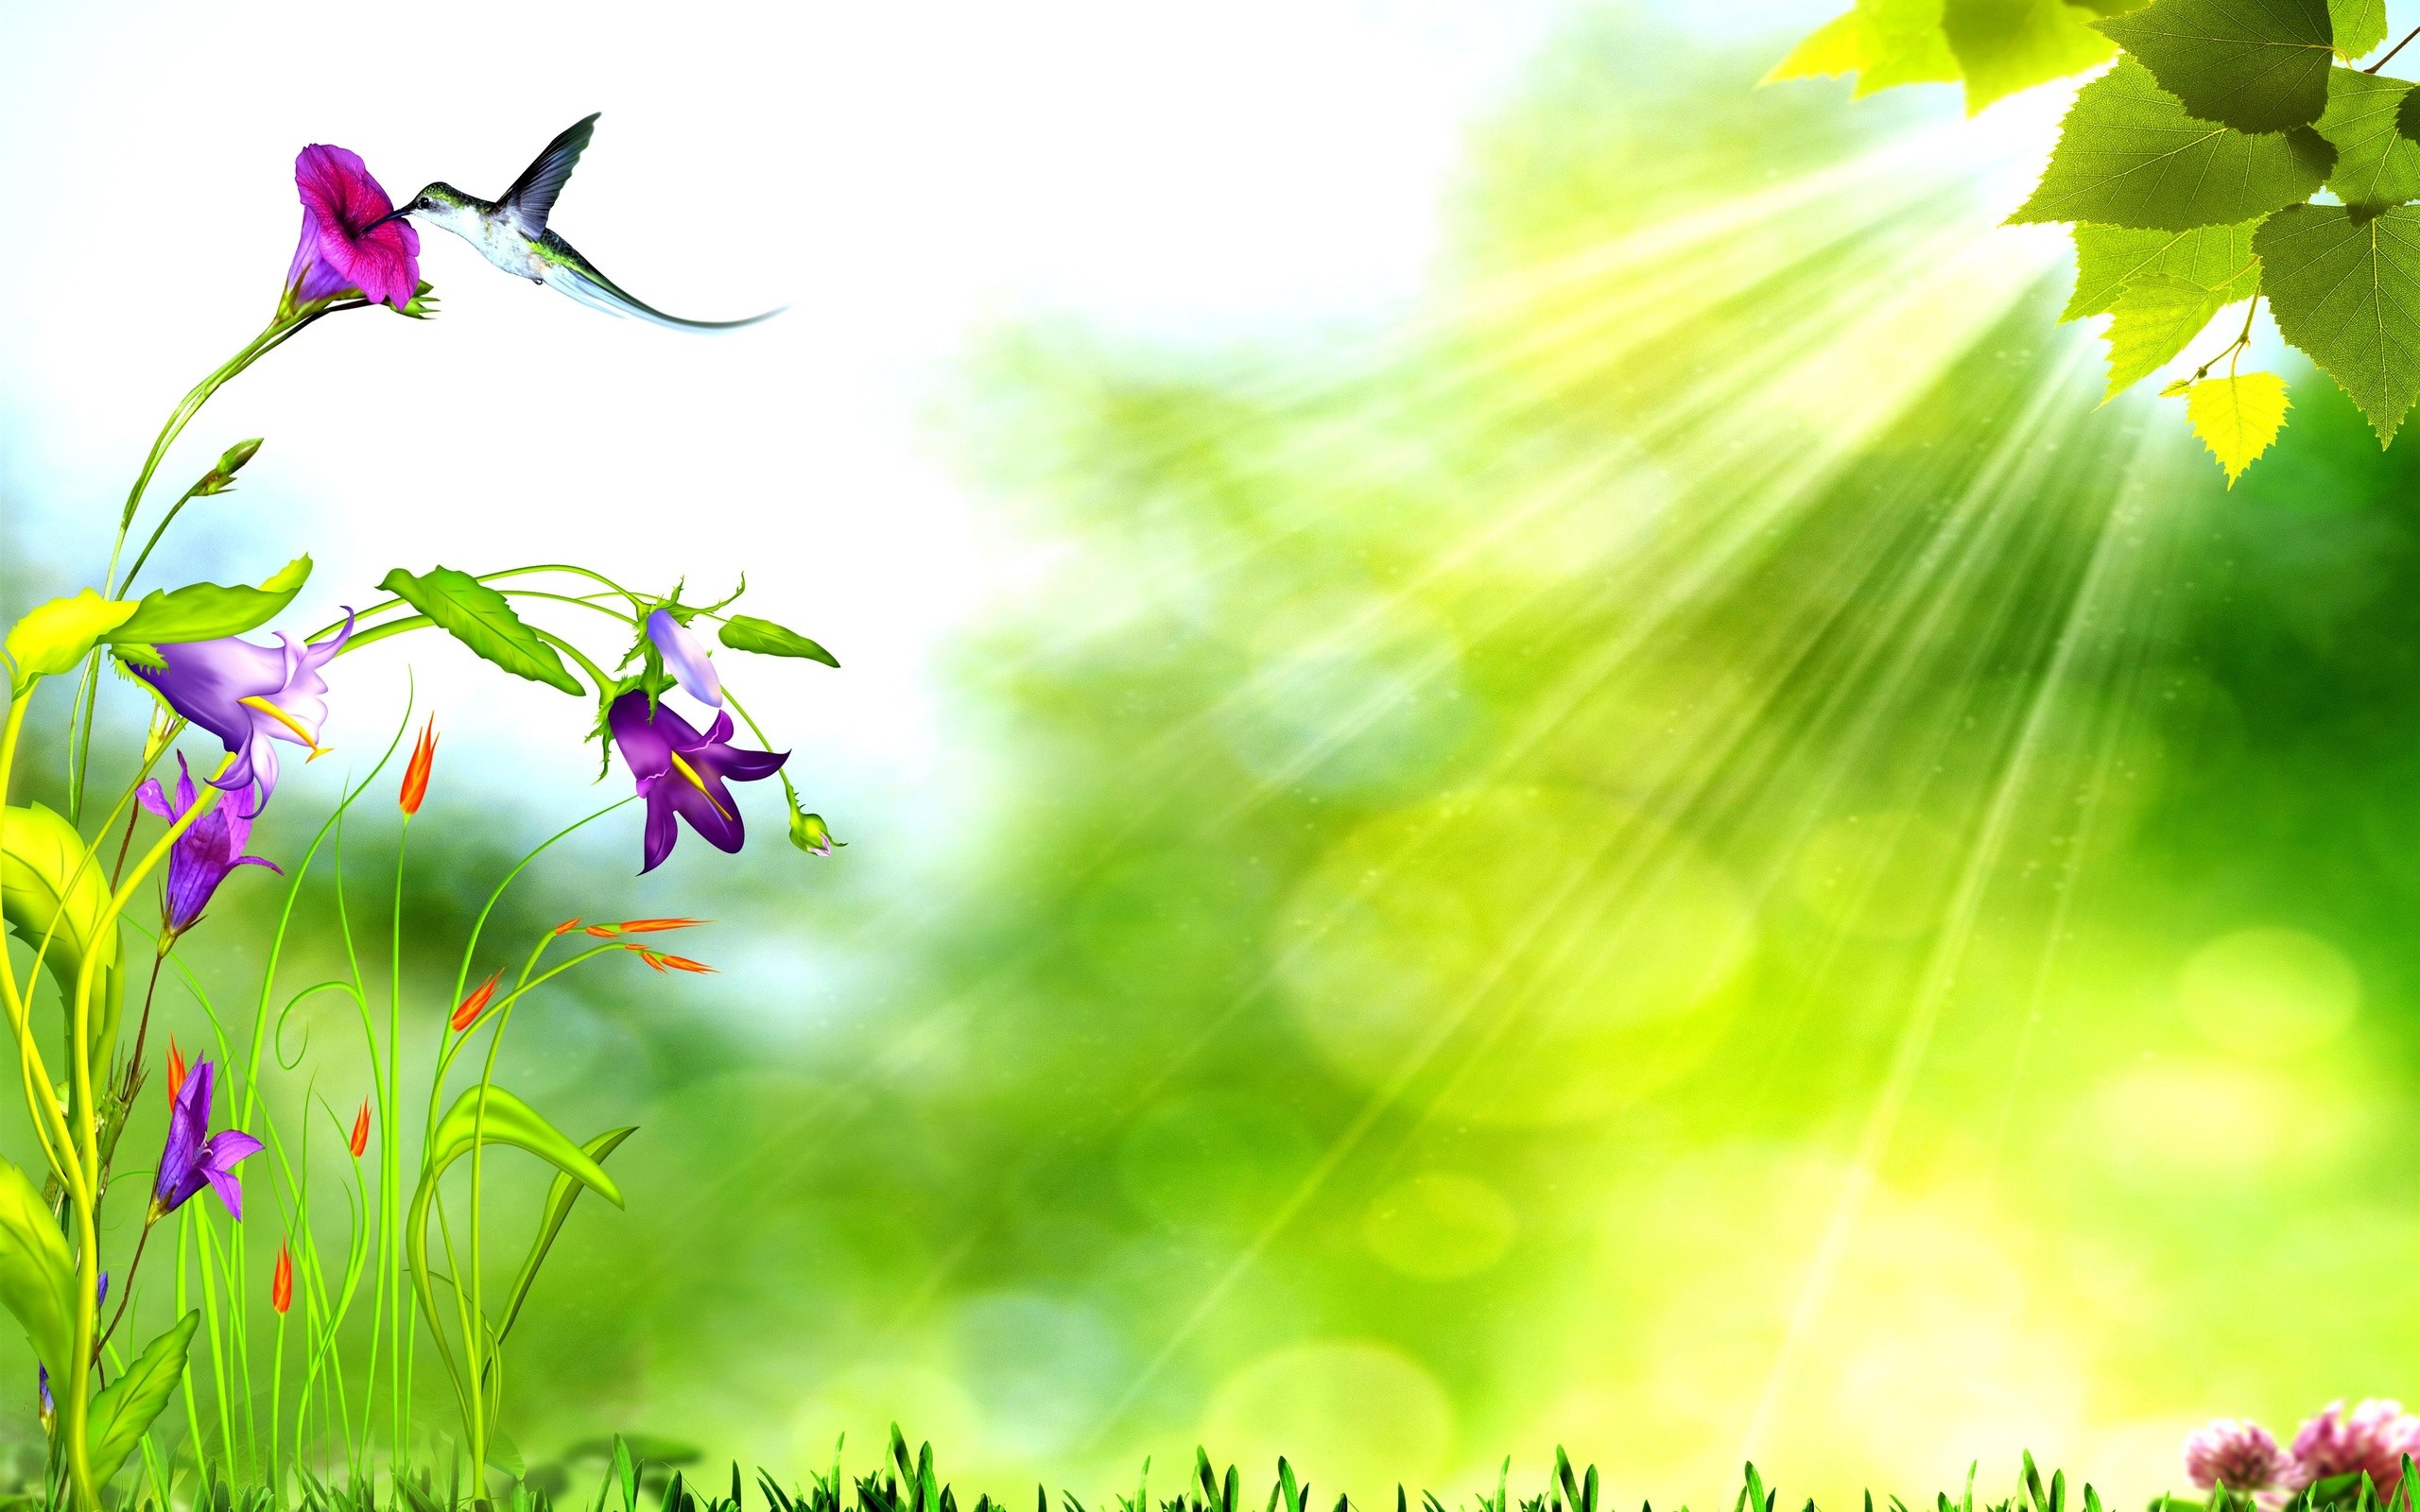 2560x1600 spring background with bird, purple flowers, green leaves and Sunlight hd  wallpaper